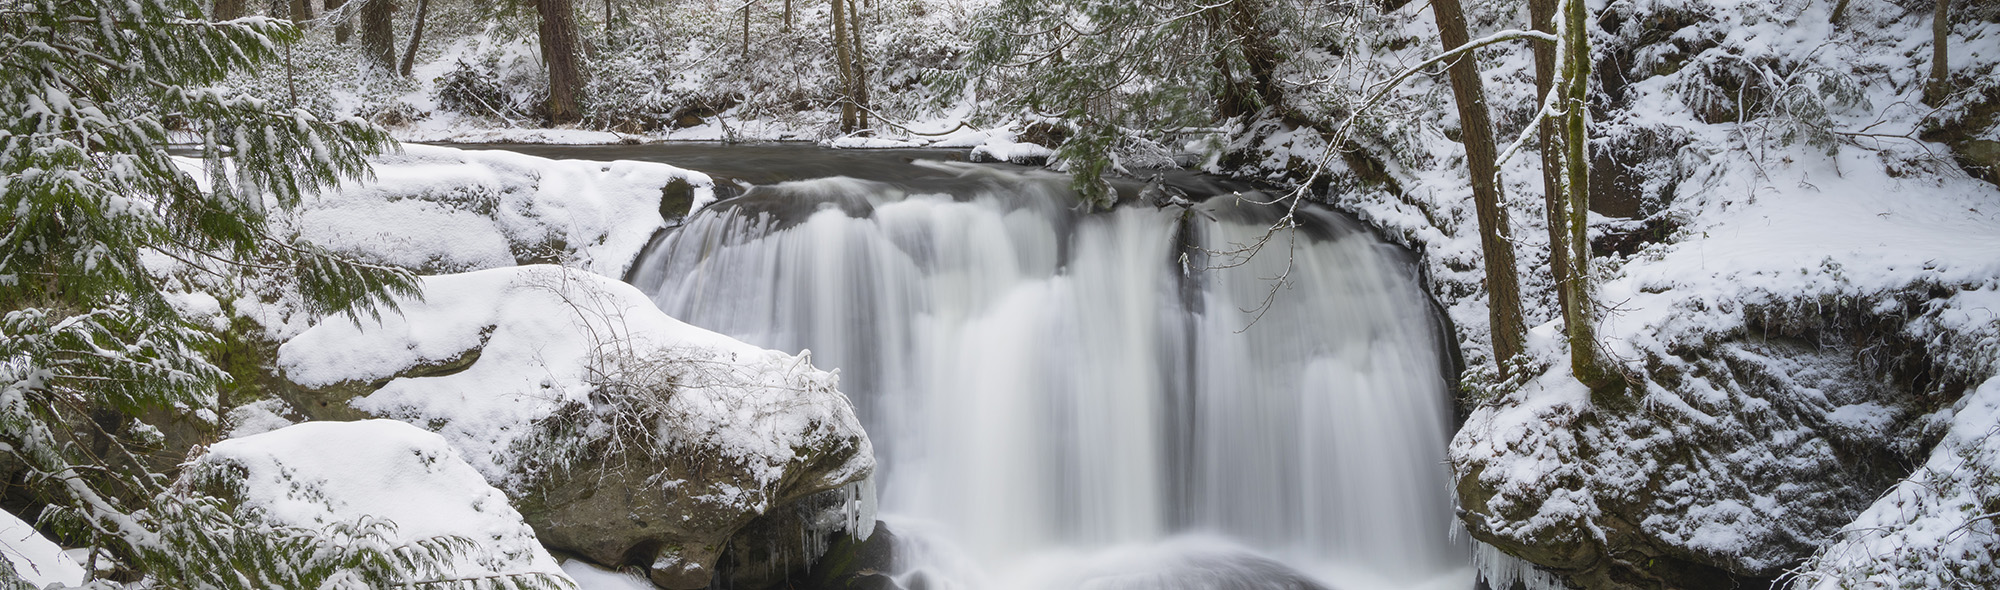 Whatcom Falls in Bellingham, WA in the winter with snow covering the ground.